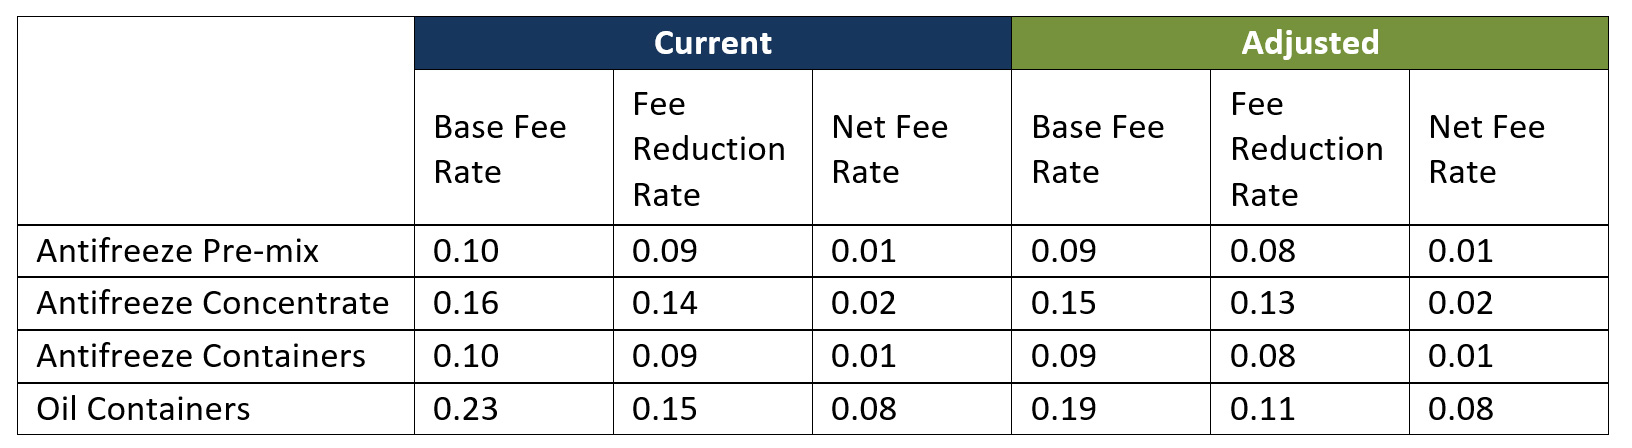 AMS base fees and reductions table